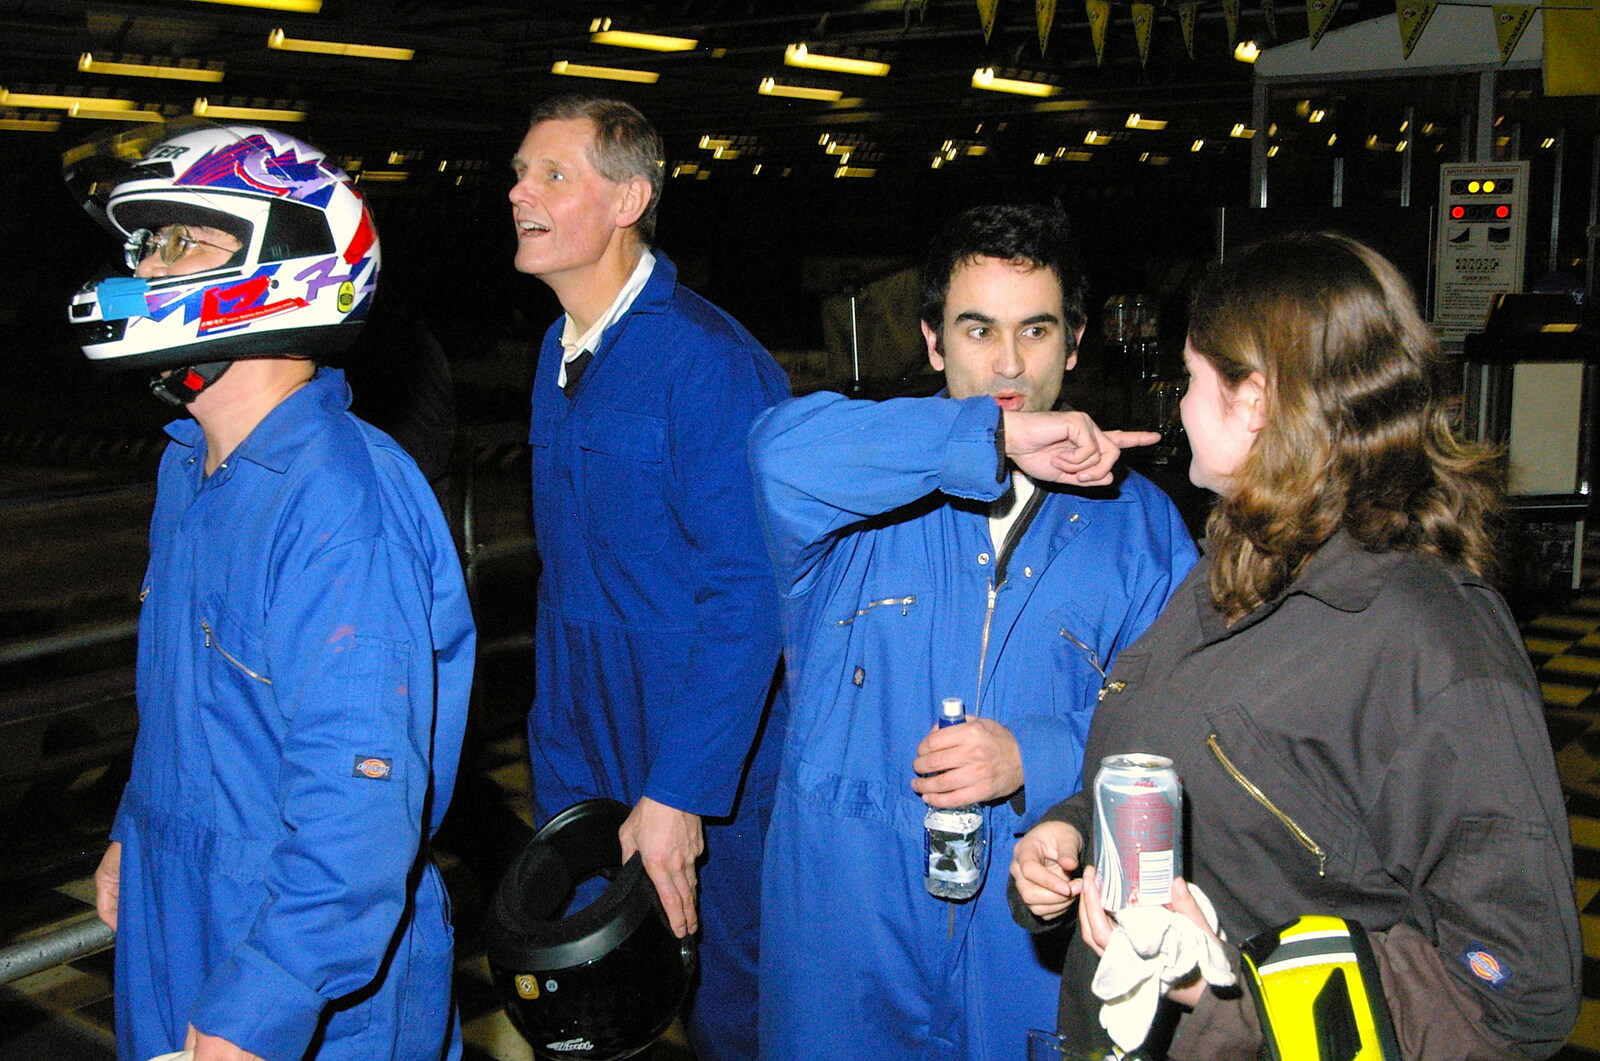 Arun chats to Isobel from Qualcomm goes Karting in Caxton, Cambridgeshire - 7th November 2005